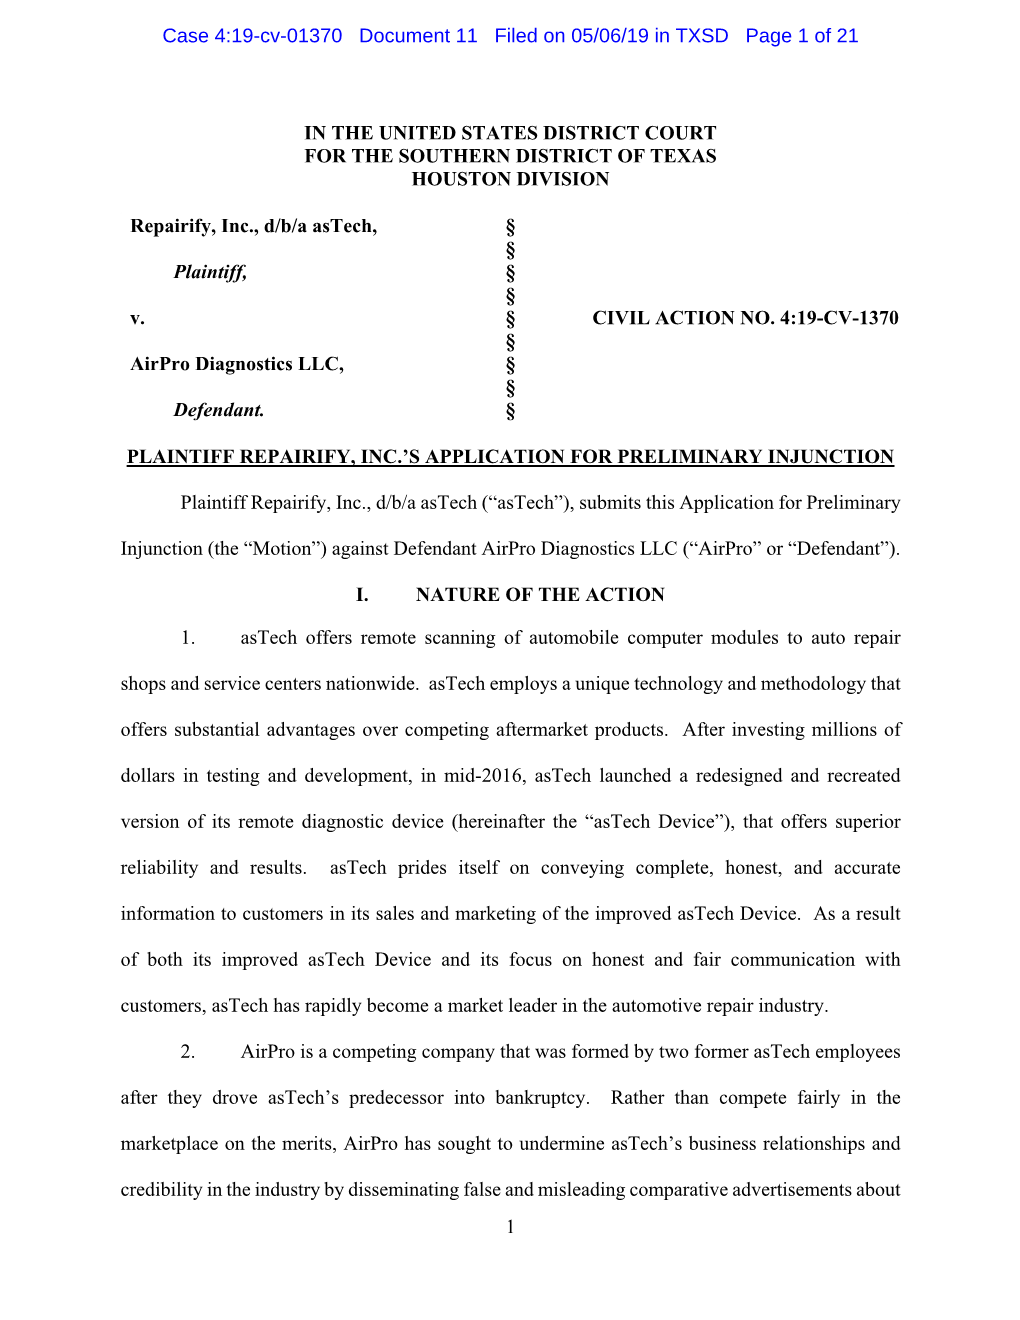 Case 4:19-Cv-01370 Document 11 Filed on 05/06/19 in TXSD Page 1 of 21